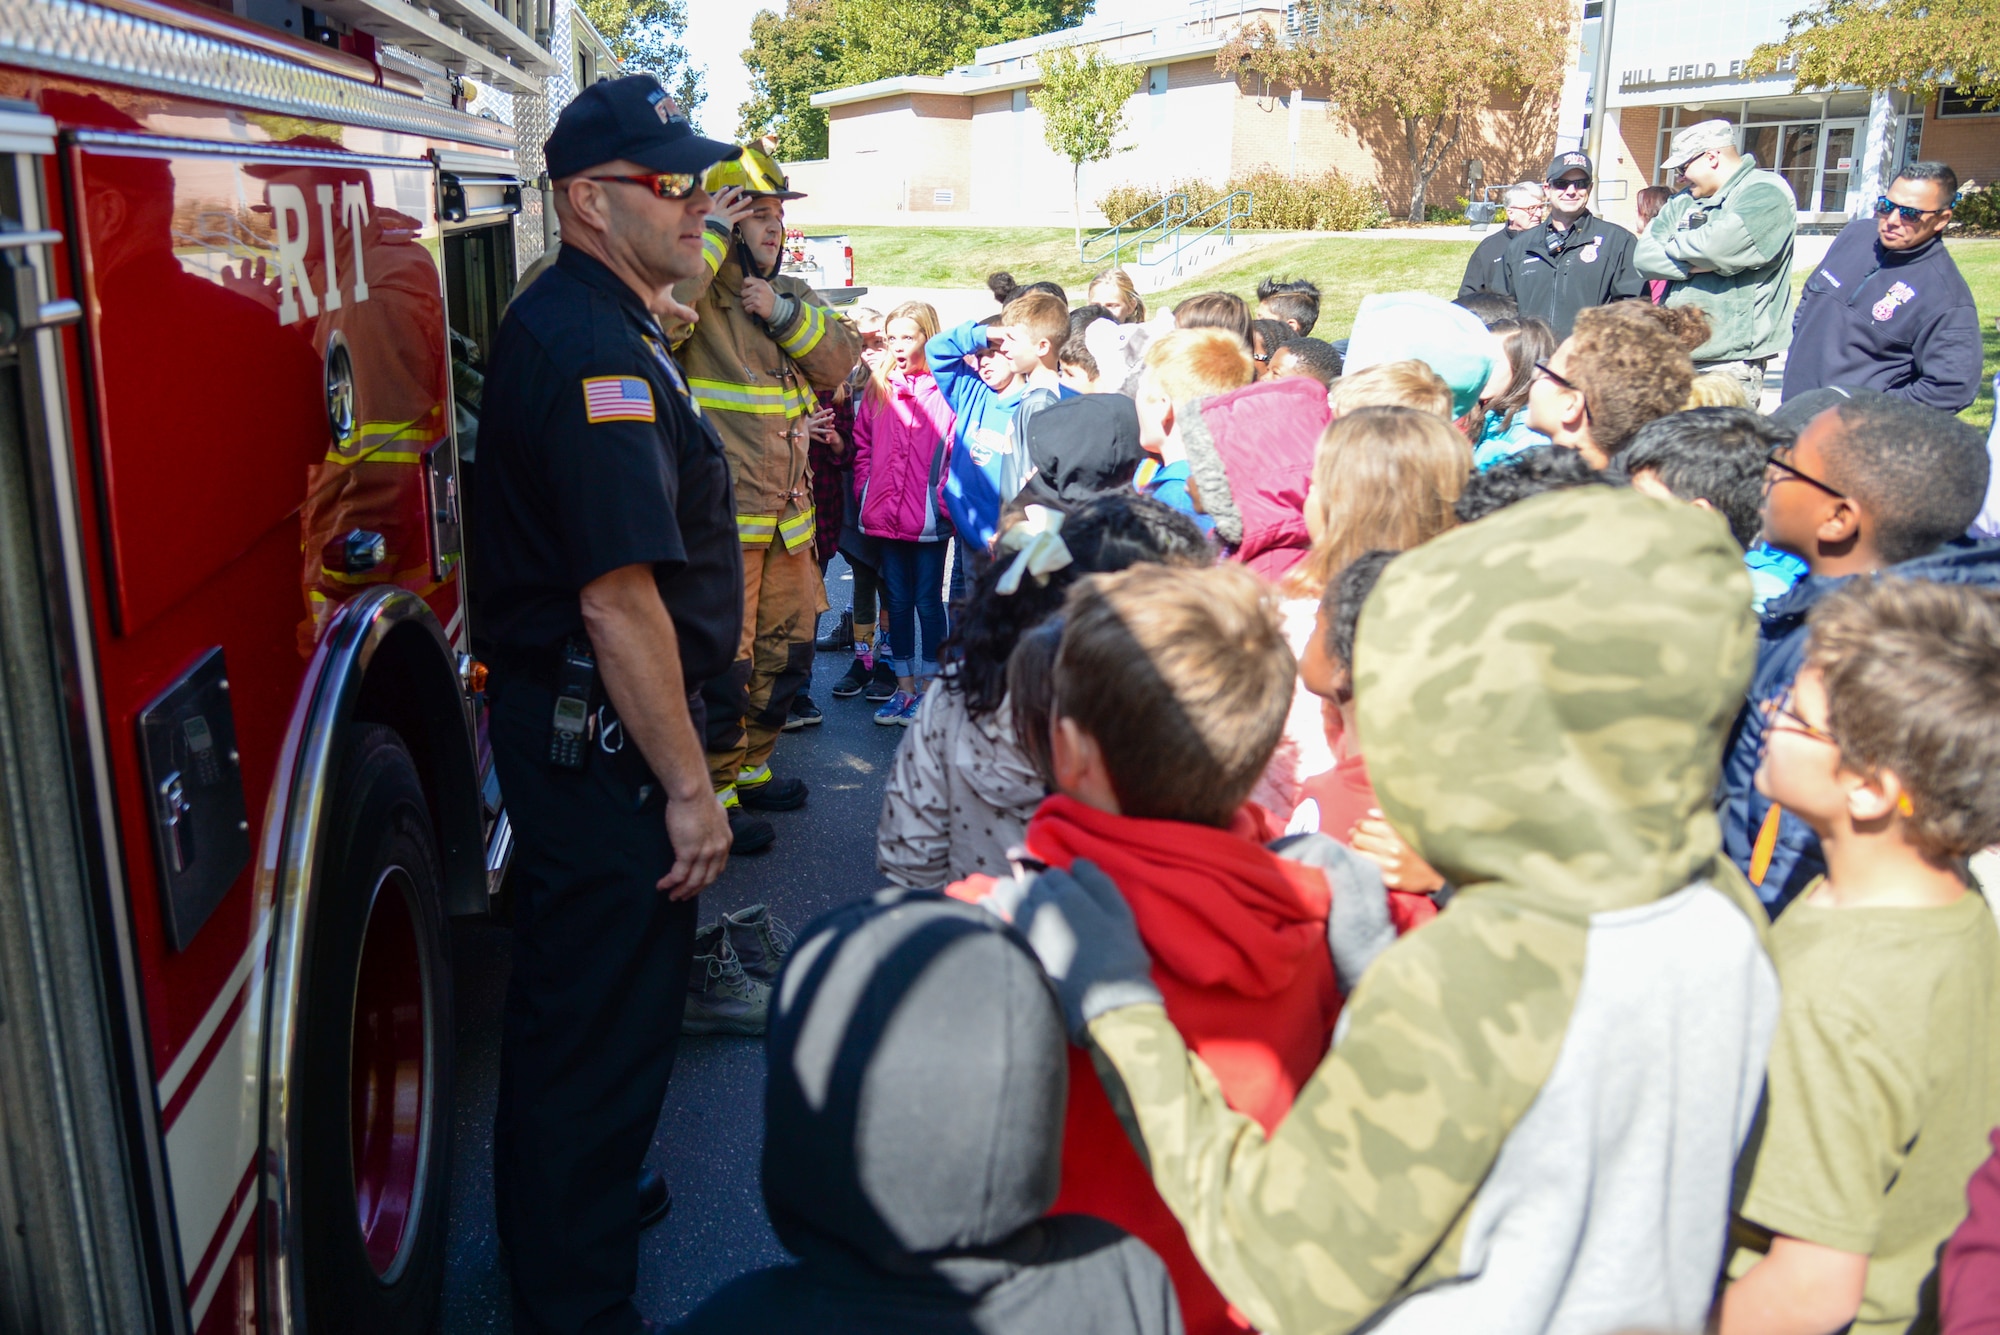 (Left to right) Doran Smith and Airman 1st Class Gabriel Briones, Fire and Emergency Services at Hill Air Force Base, Utah, demonstrate firefighting equipment for Hill Field Elementary students Oct. 10, 2019, in front of the department’s fire engine. This was one of the numerous outreach events base firefighters sponsored for Fire Prevention Week Oct. 6-12. (U.S. Air Force photo by Cynthia Griggs)